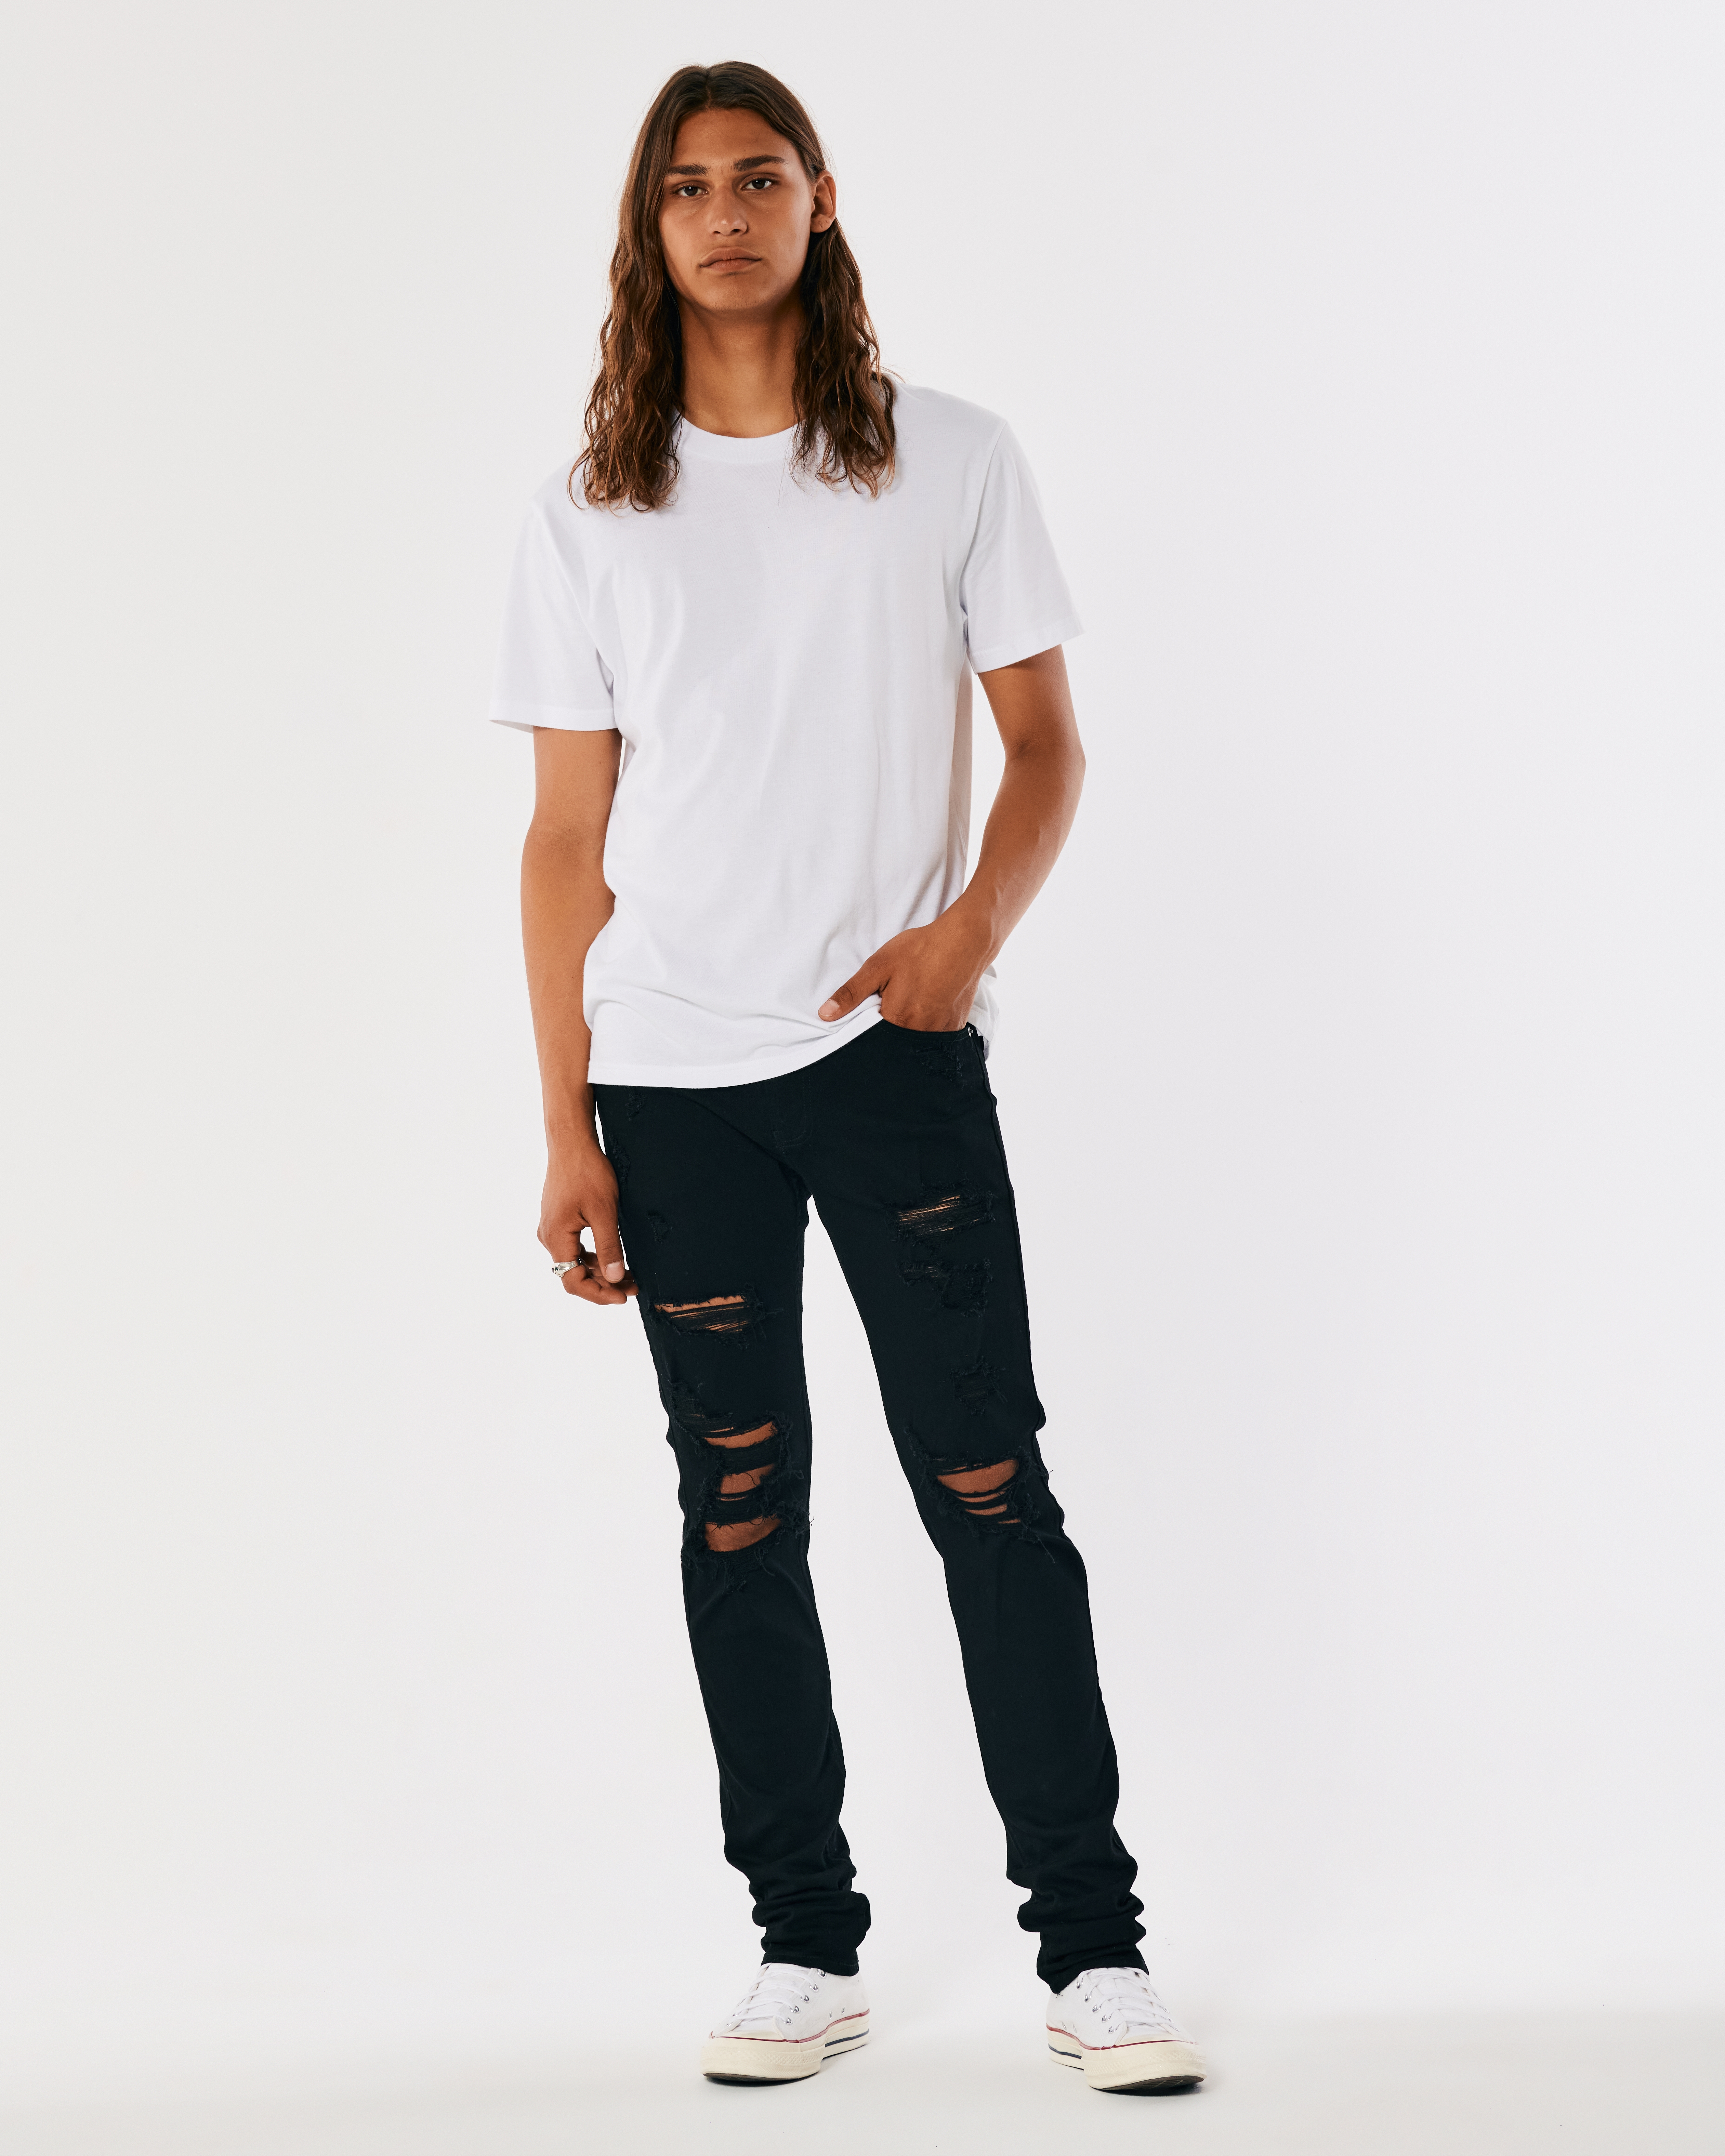 Black No Fade Stacked Skinny Jeans